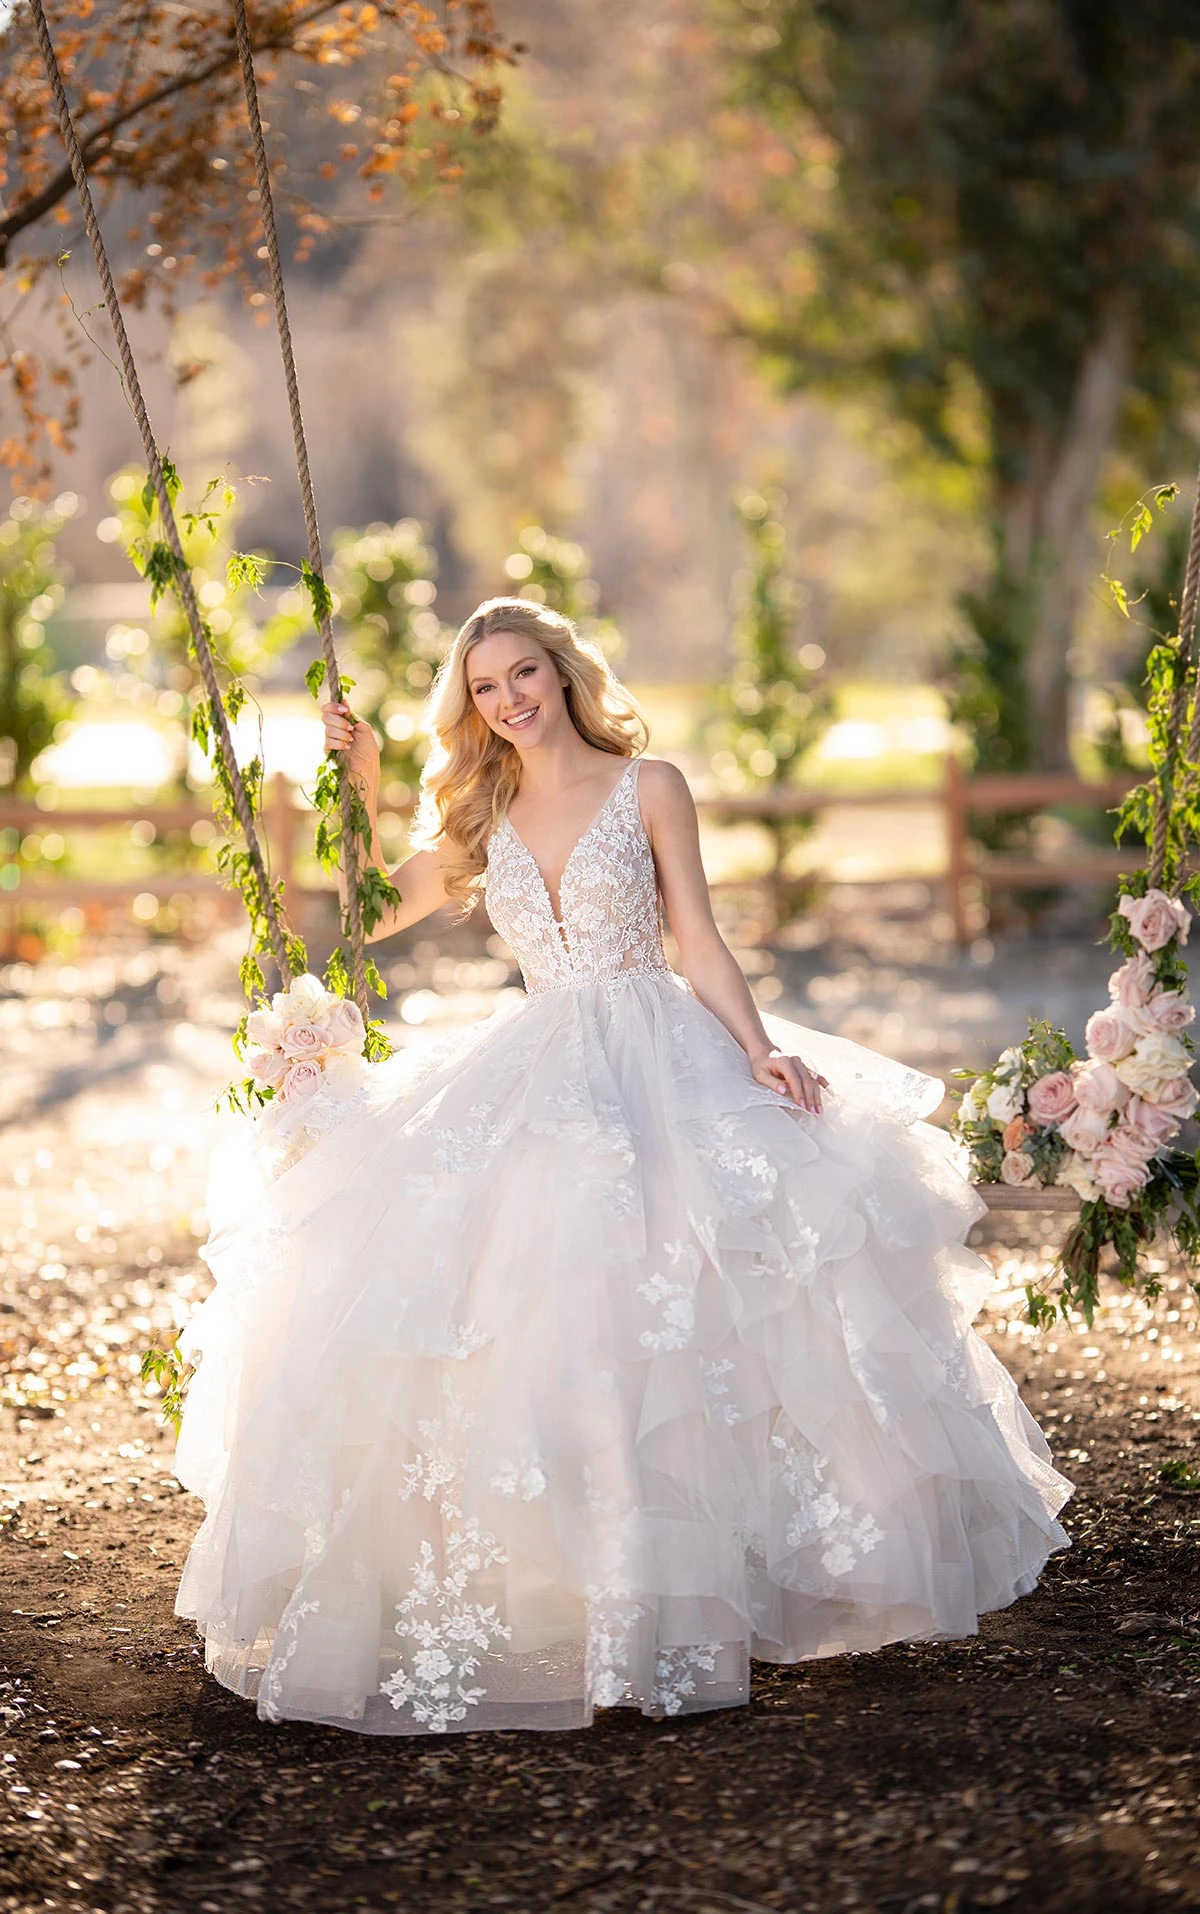 1105 Whimsical Tiered Ballgown  by Martina Liana